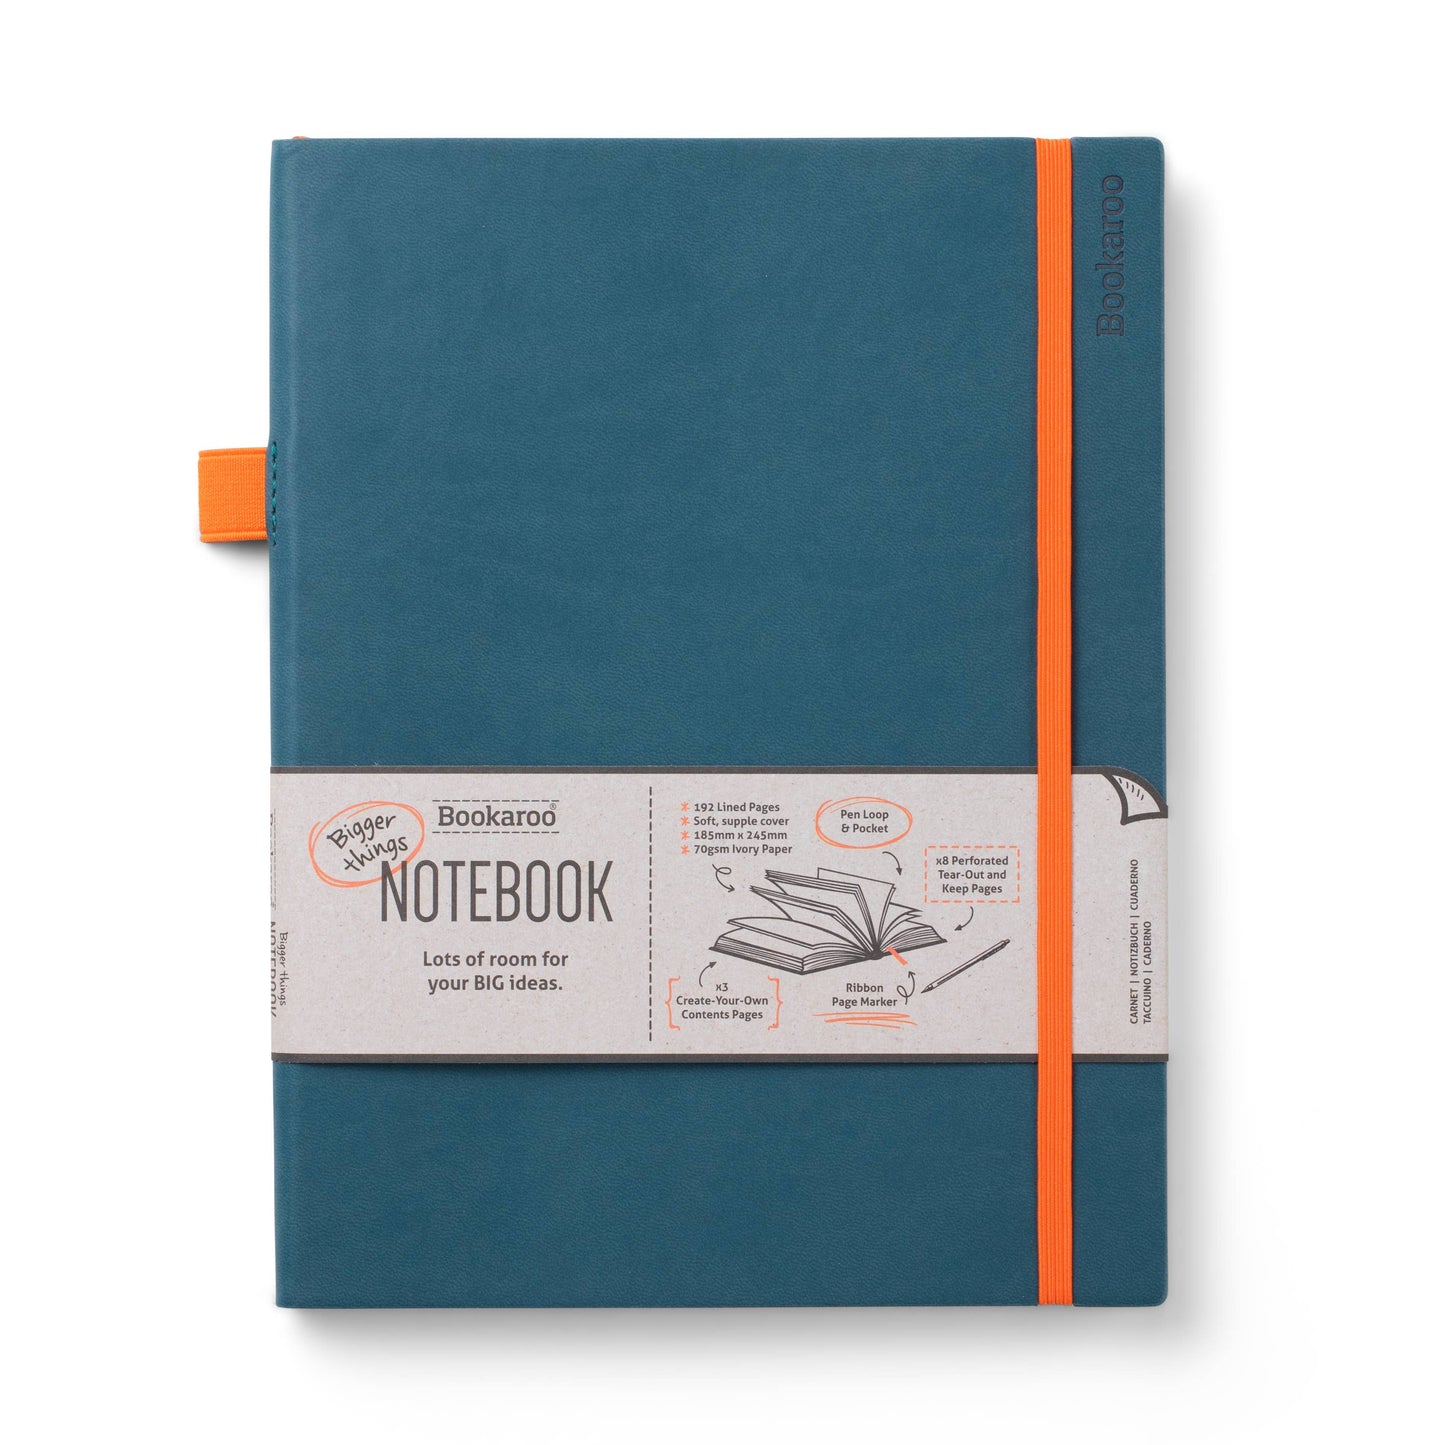 Bookaroo Bigger Things Notebook: Forest Green